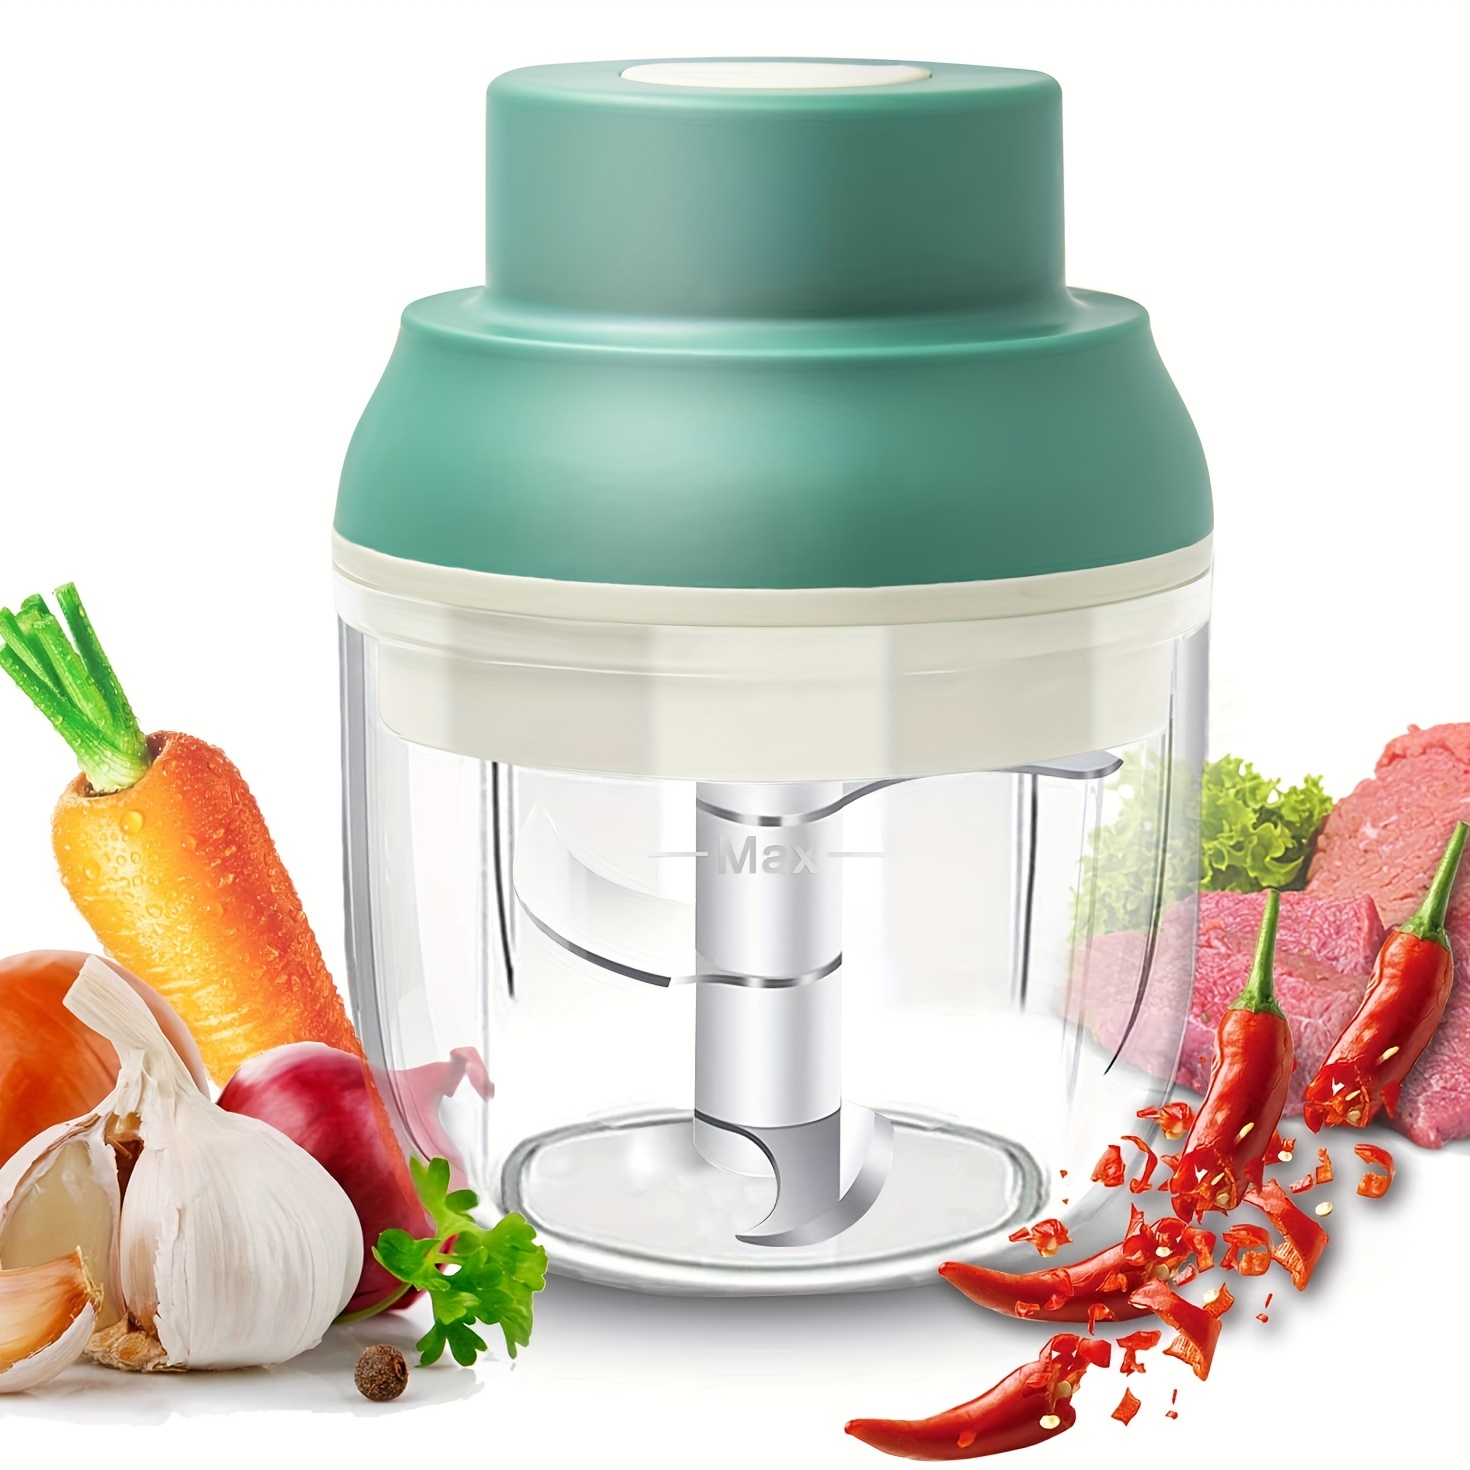  Rae Dunn Electric Mini Garlic Chopper,USB Rechargeable,  Portable Cordless Wireless Food Chopper,8 oz Small Food Processor for  Chopping Garlic, Ginger, Herbs, Minced Meat, Onion and More (Cream): Home &  Kitchen